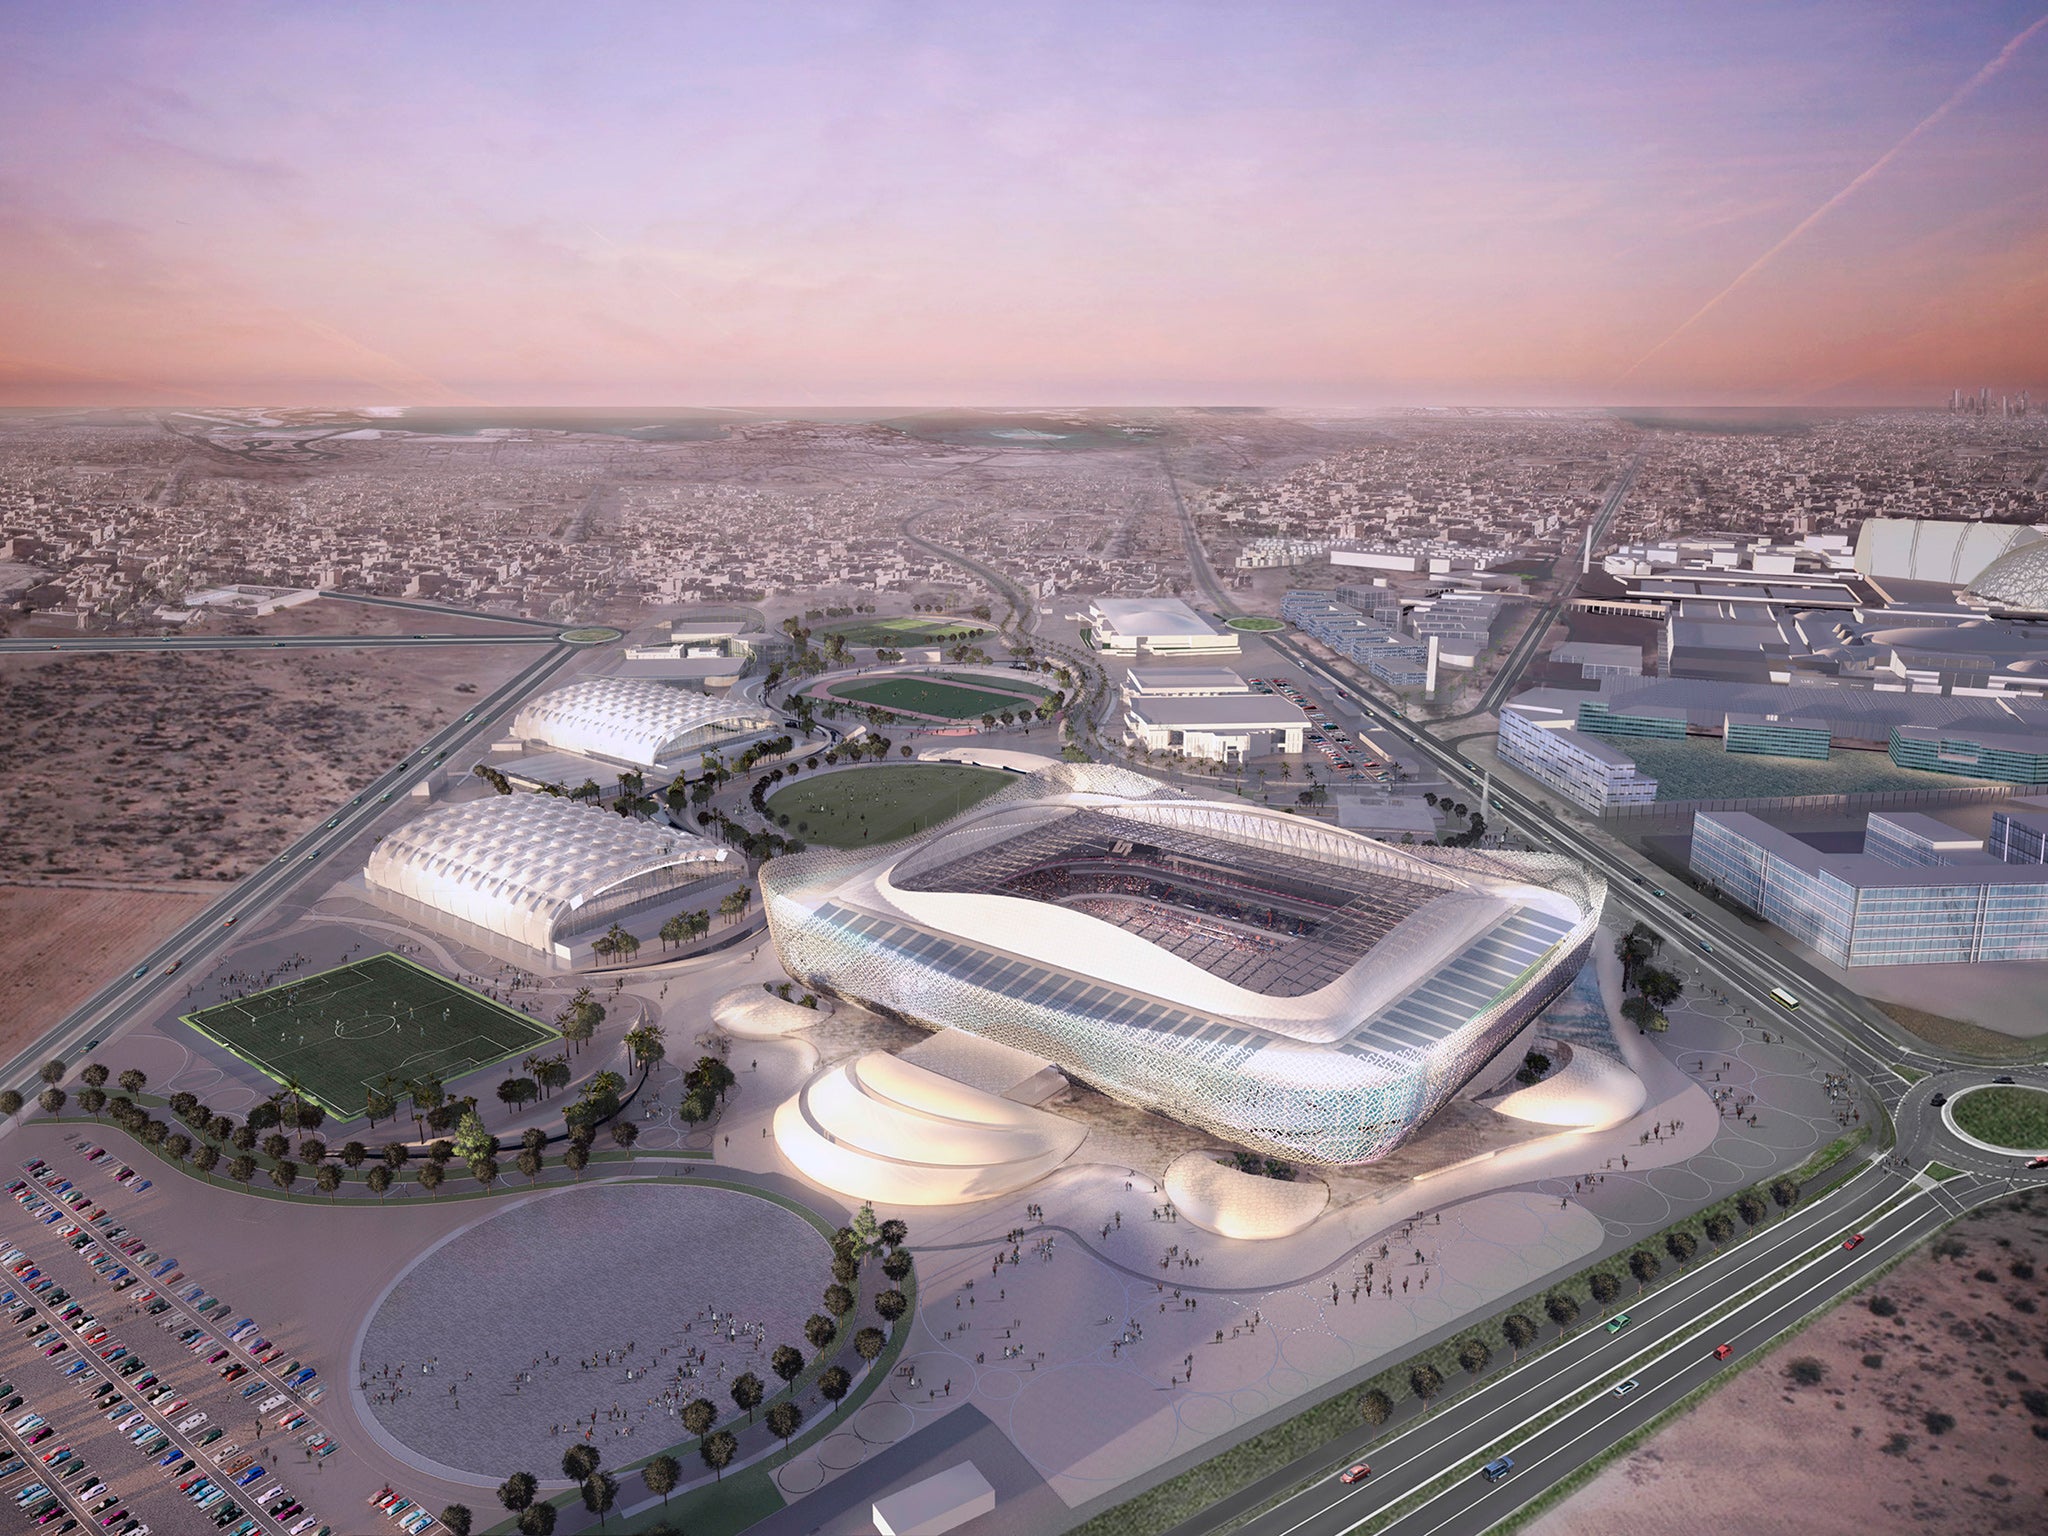 An artist's impression of Al Rayyan Stadium, one of the proposed venues for the 2022 World Cup